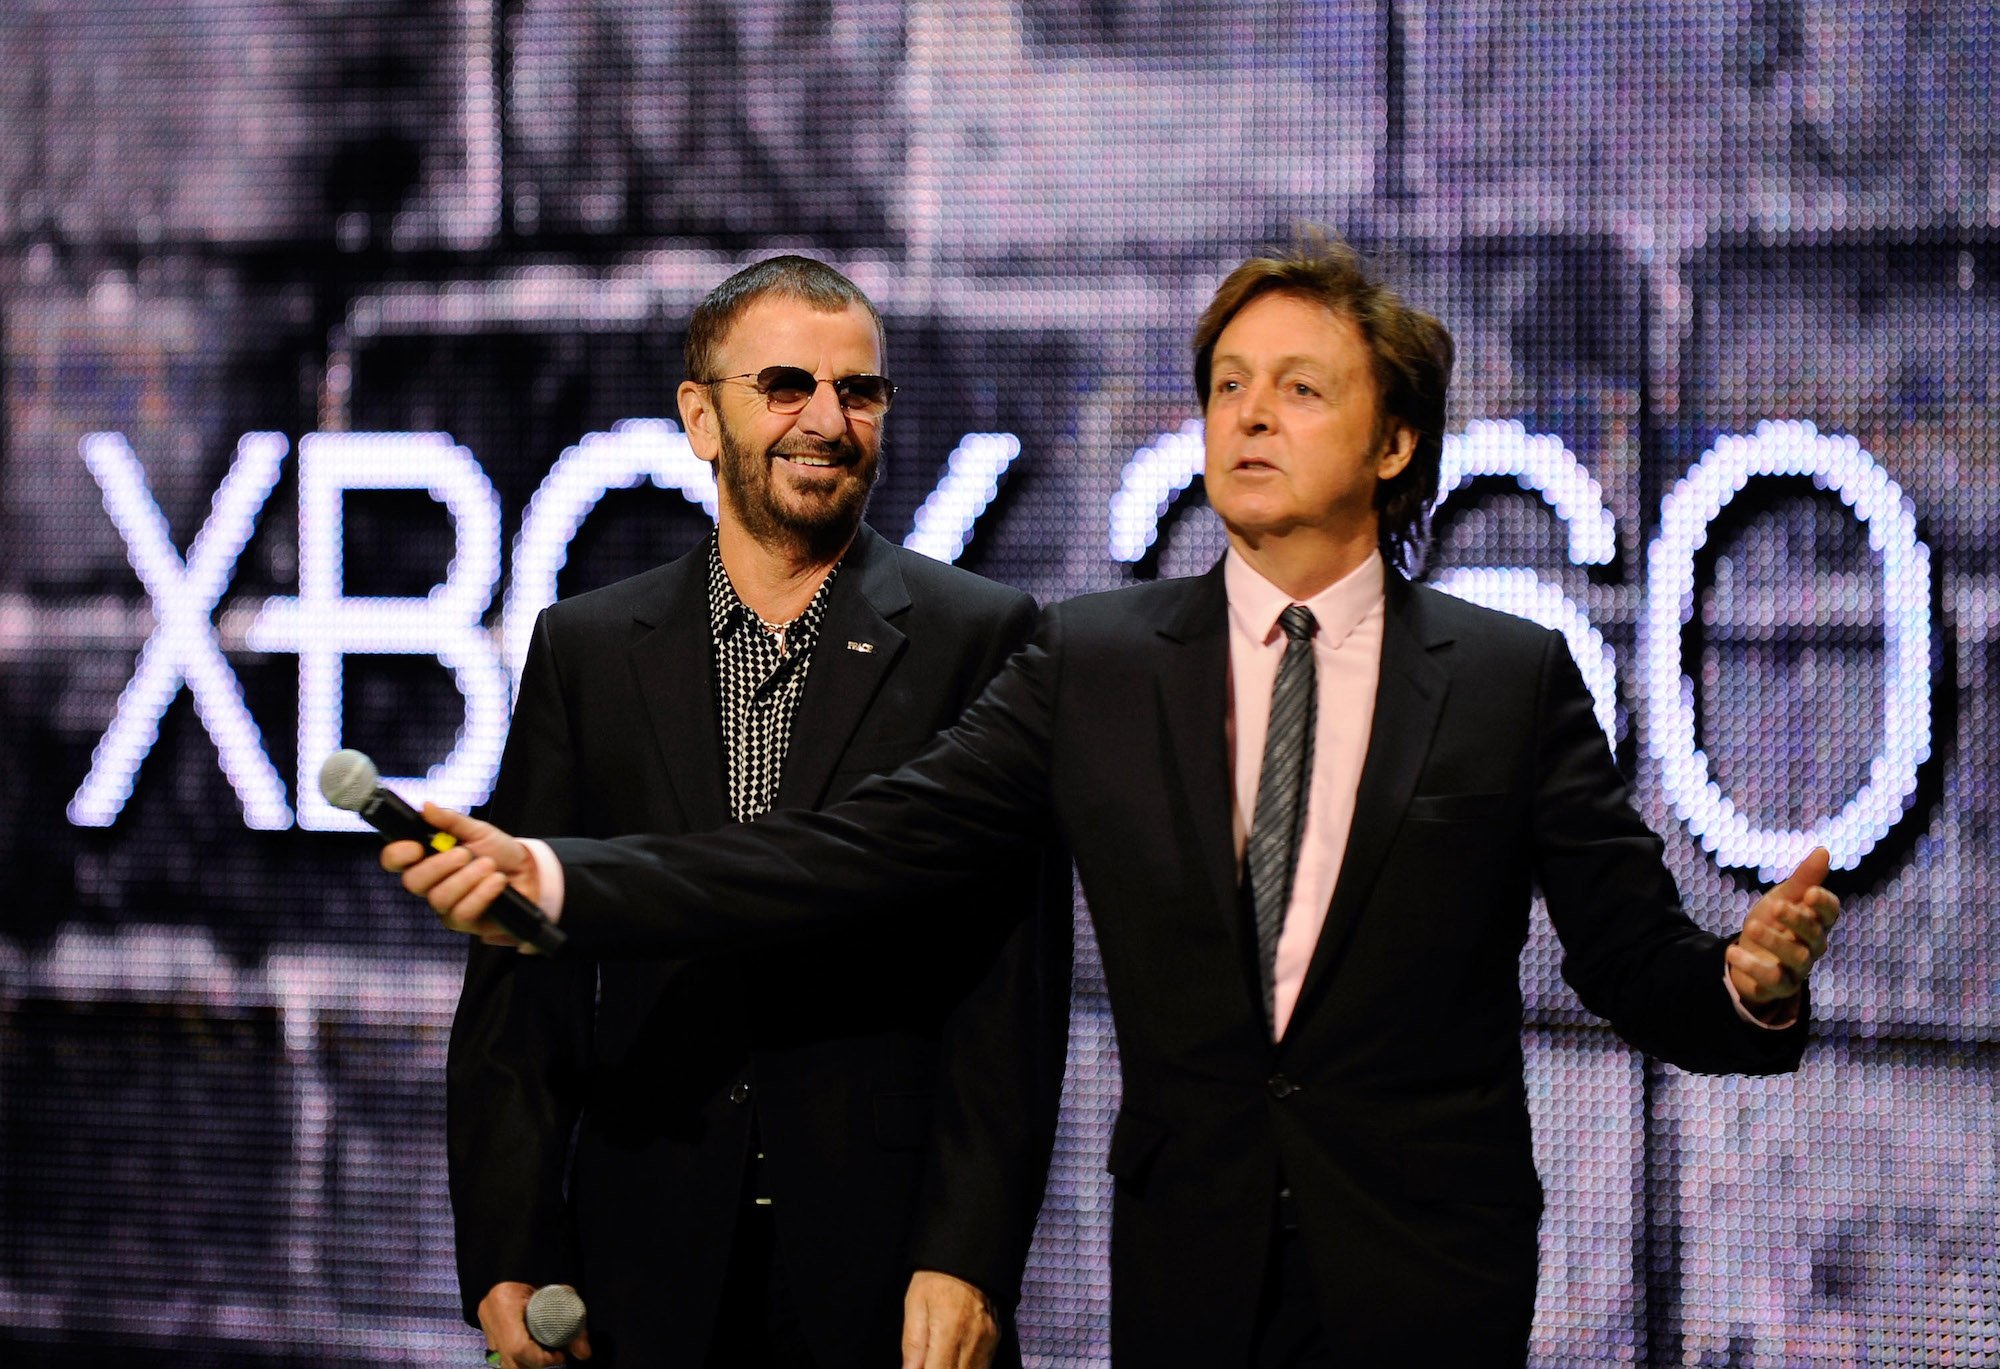 Ringo Starr and Paul McCartney at the E3 gaming expo in 2009